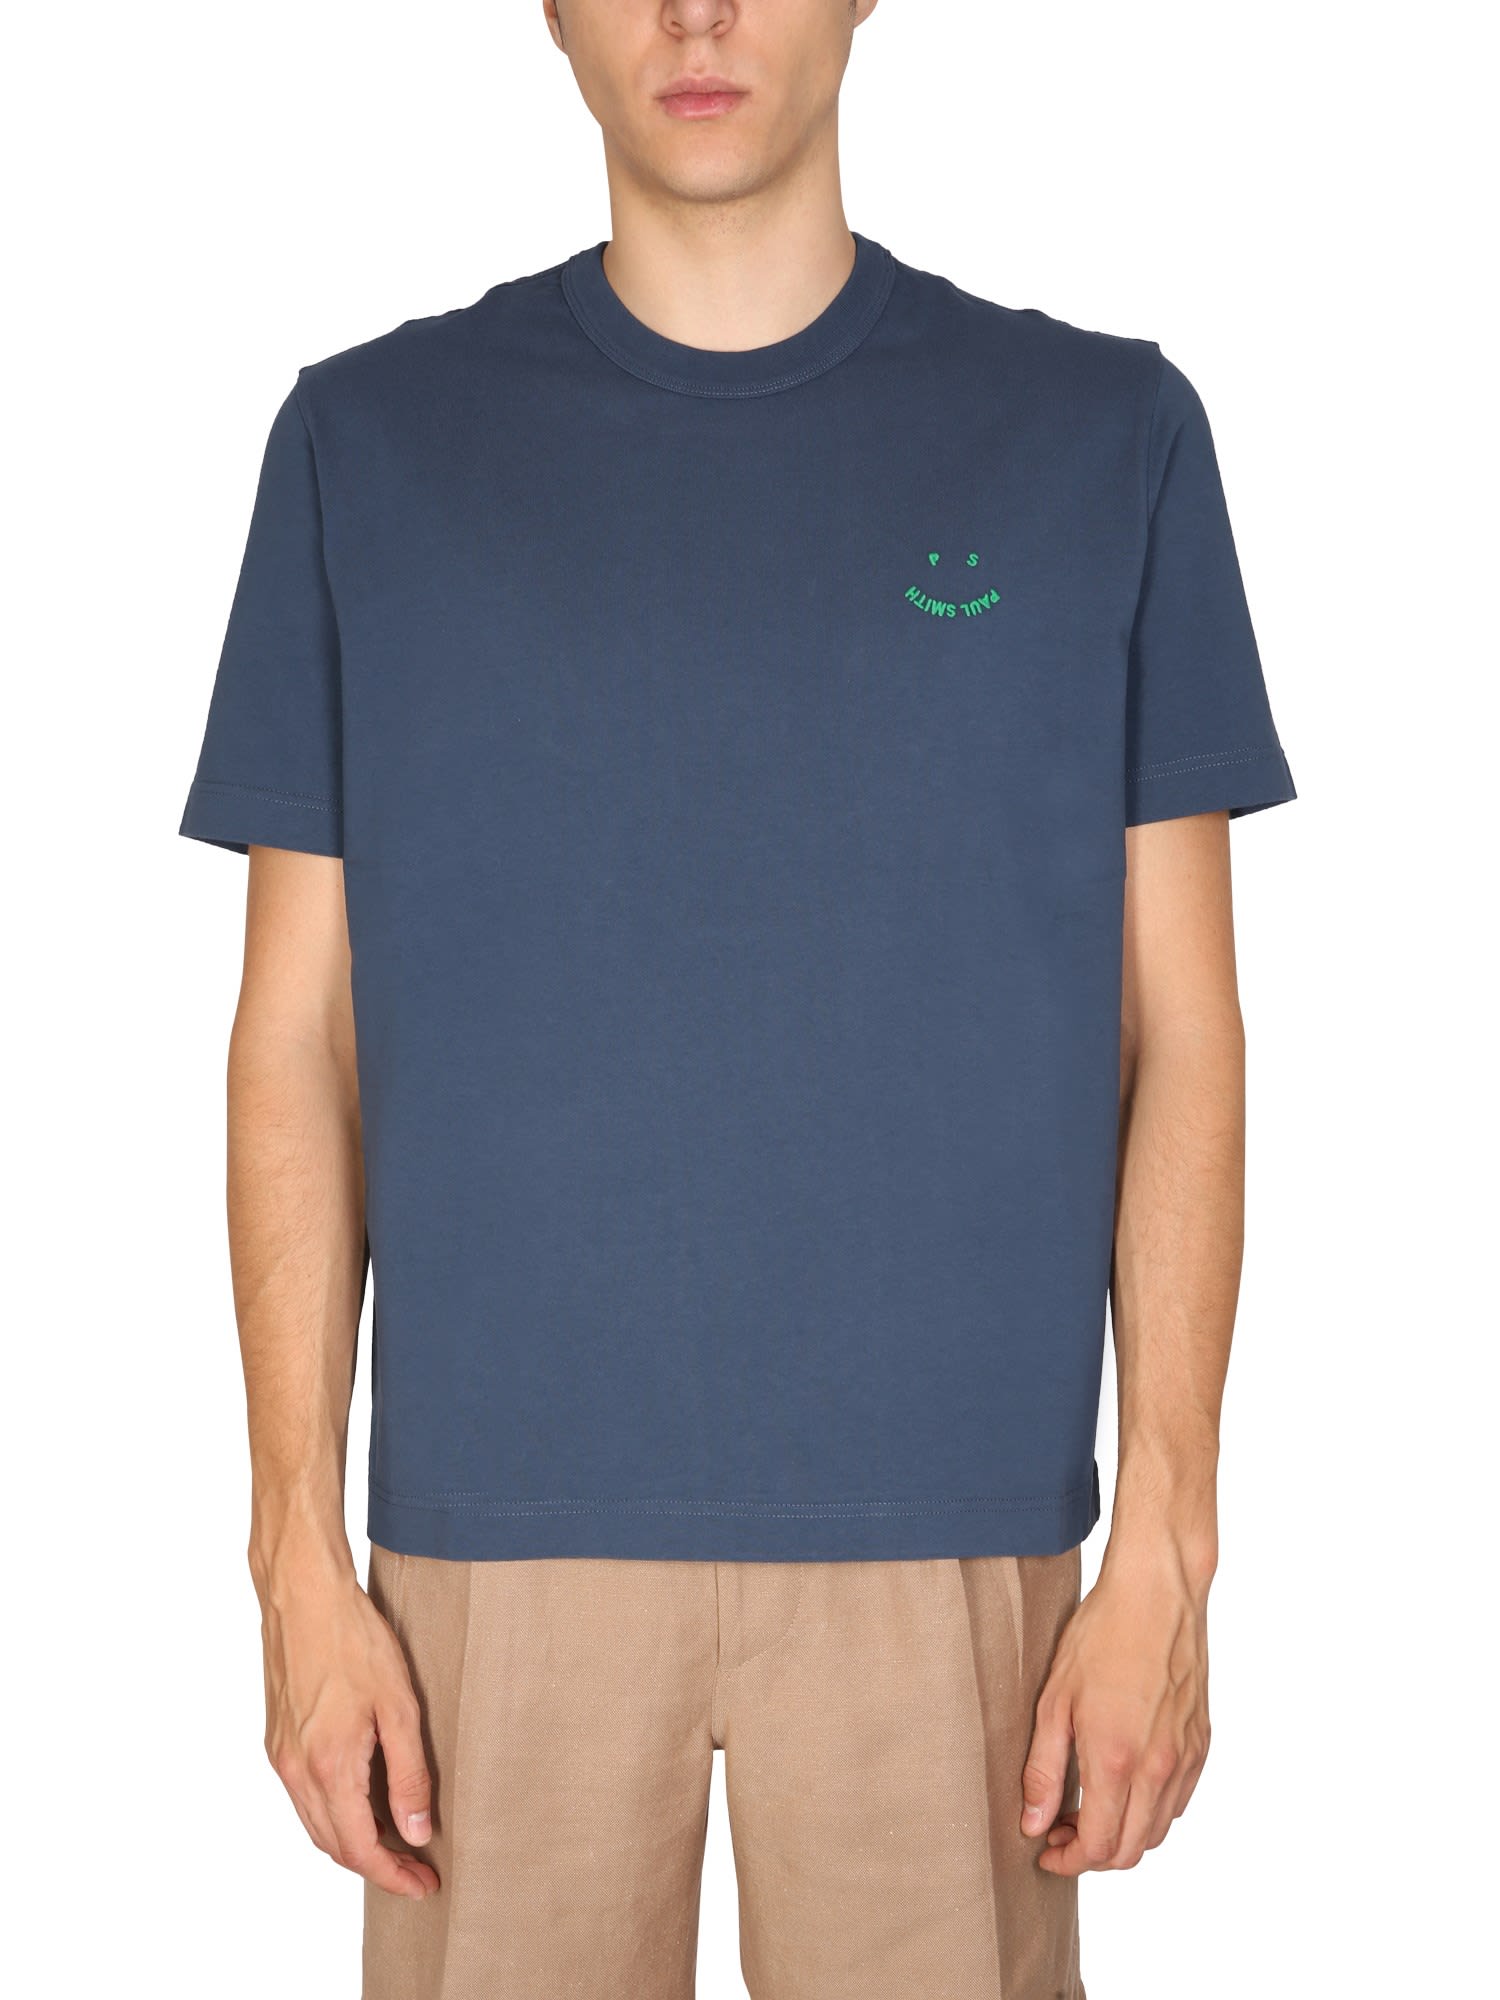 PS by Paul Smith Crewneck T-shirt